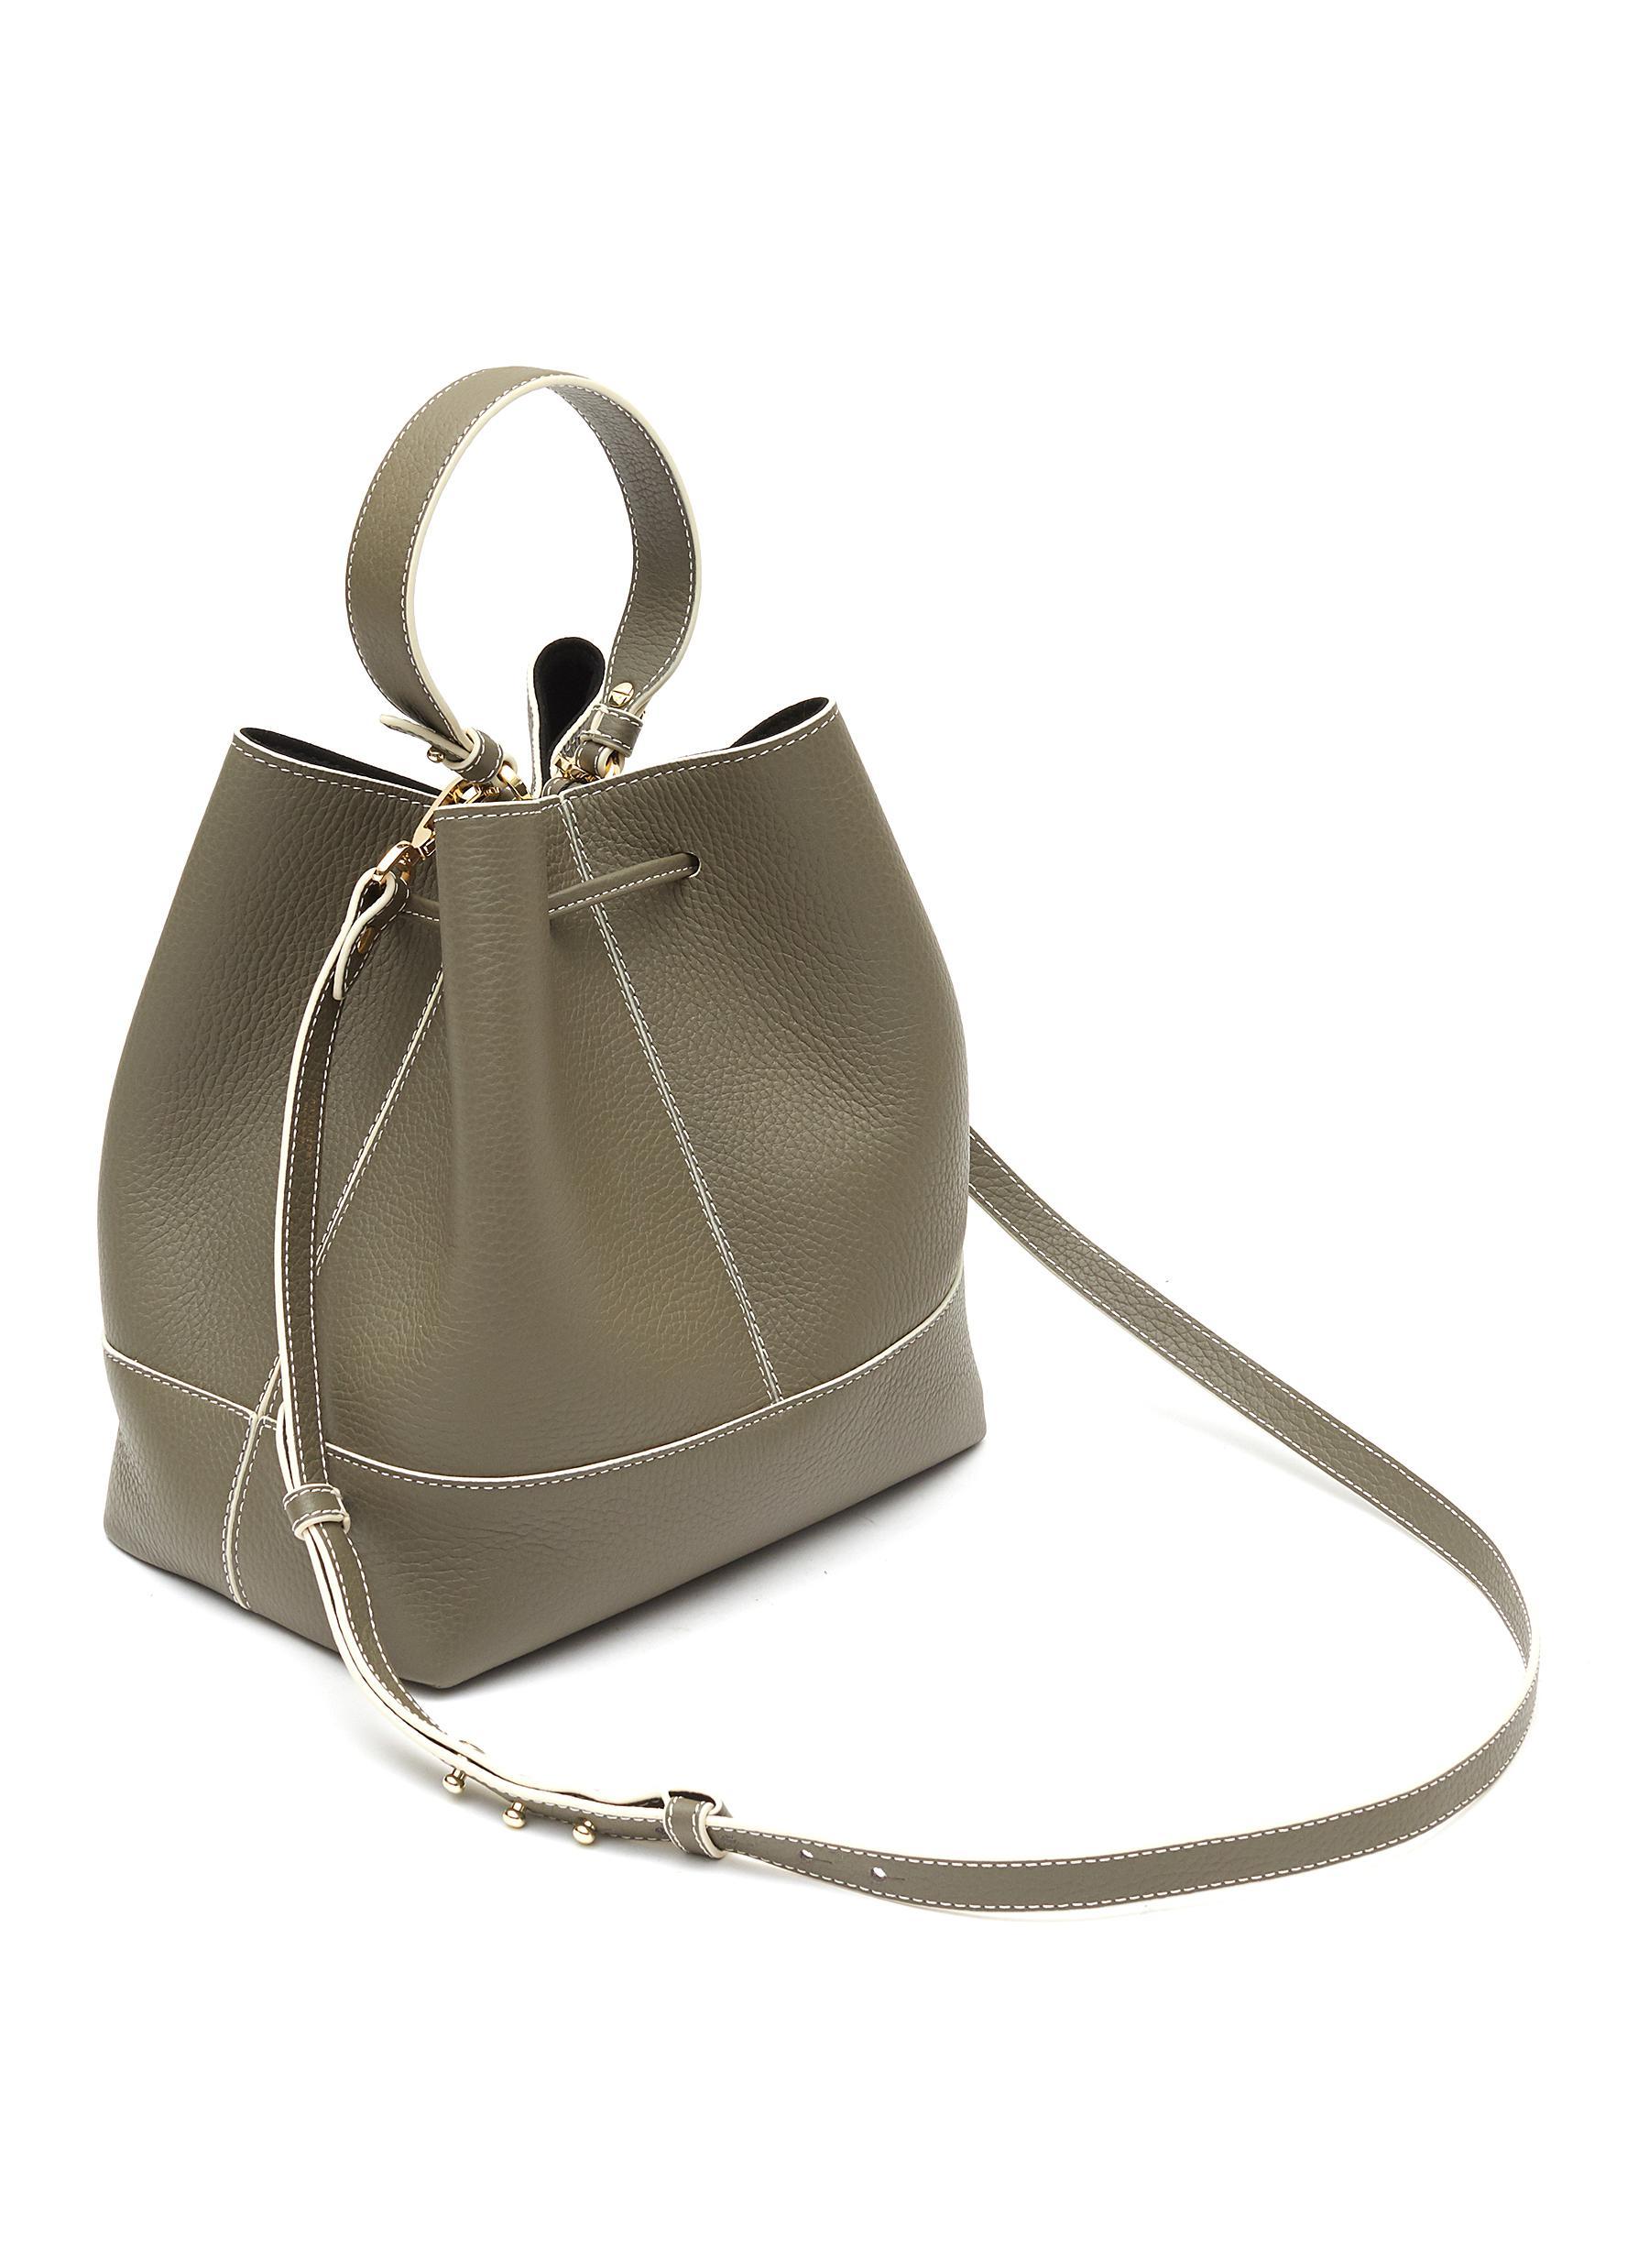 Strathberry, Bags, Strathberry Lana Midi Bucket Bag In Black Leather